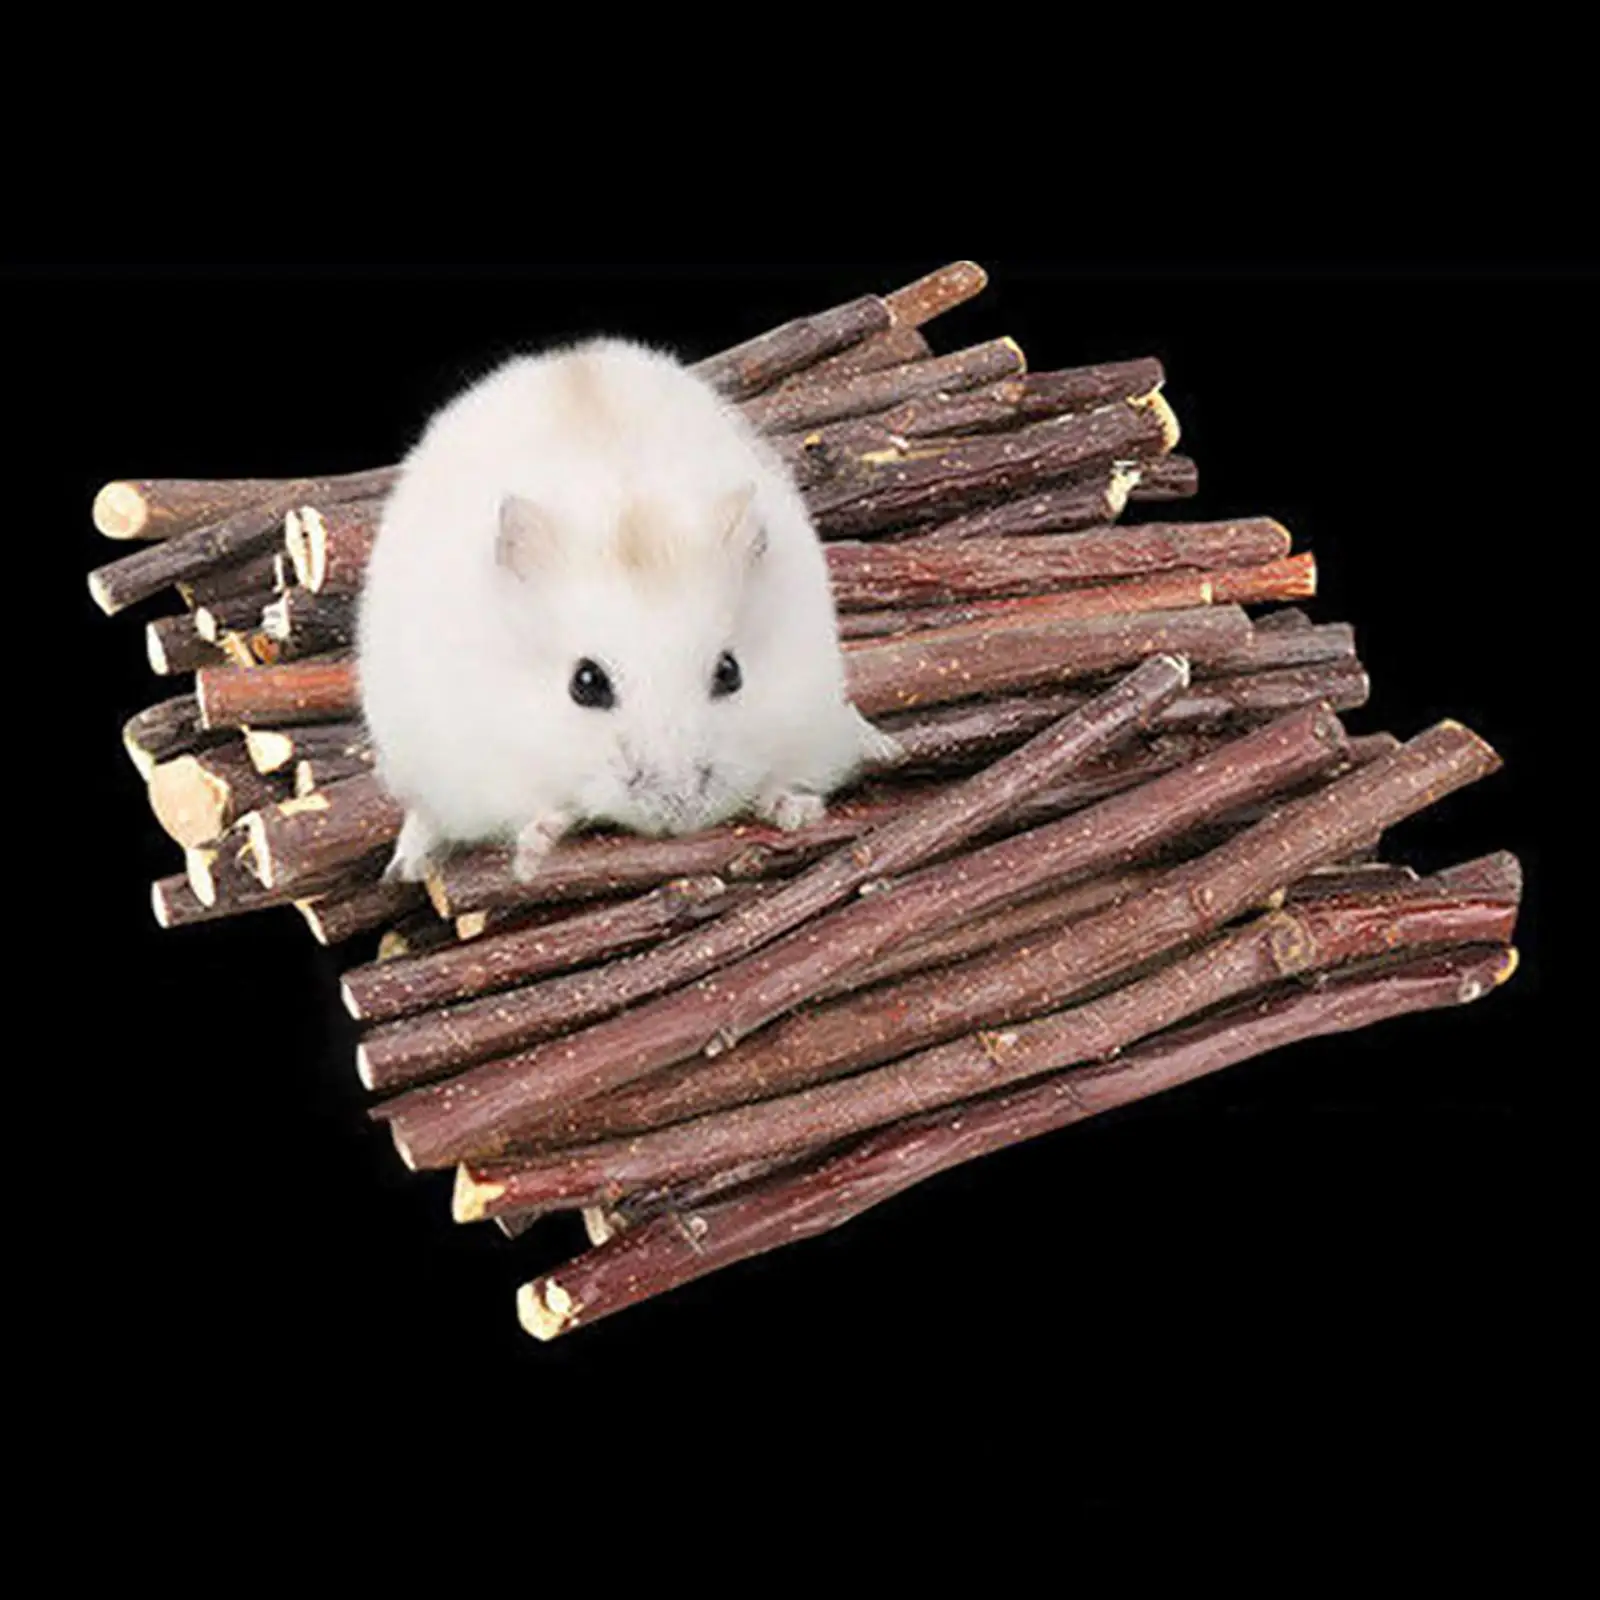 1000G Hamster Chew Sticks Molar Accessories Rat Toys Twigs Wood for Groundhog Treats Rodent Animals